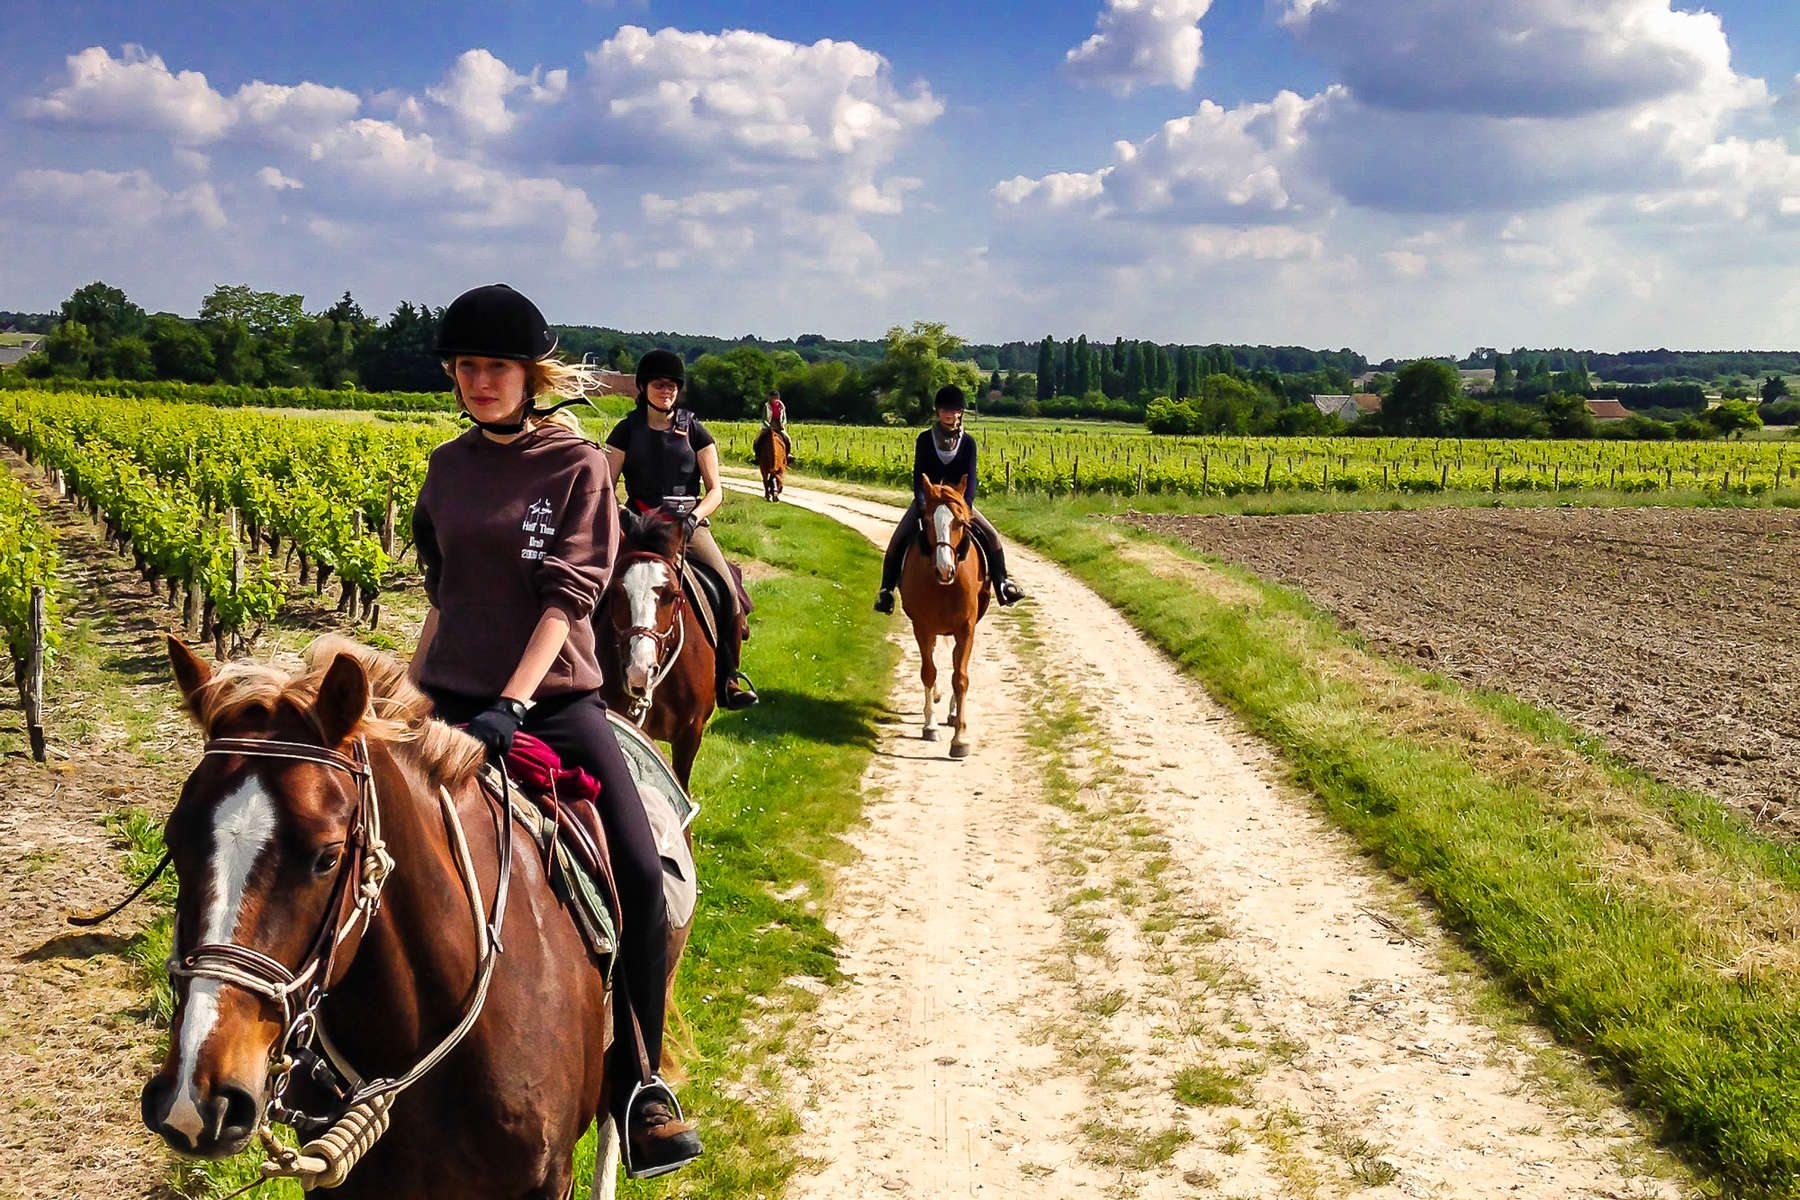 Riders riding across vineyards in France